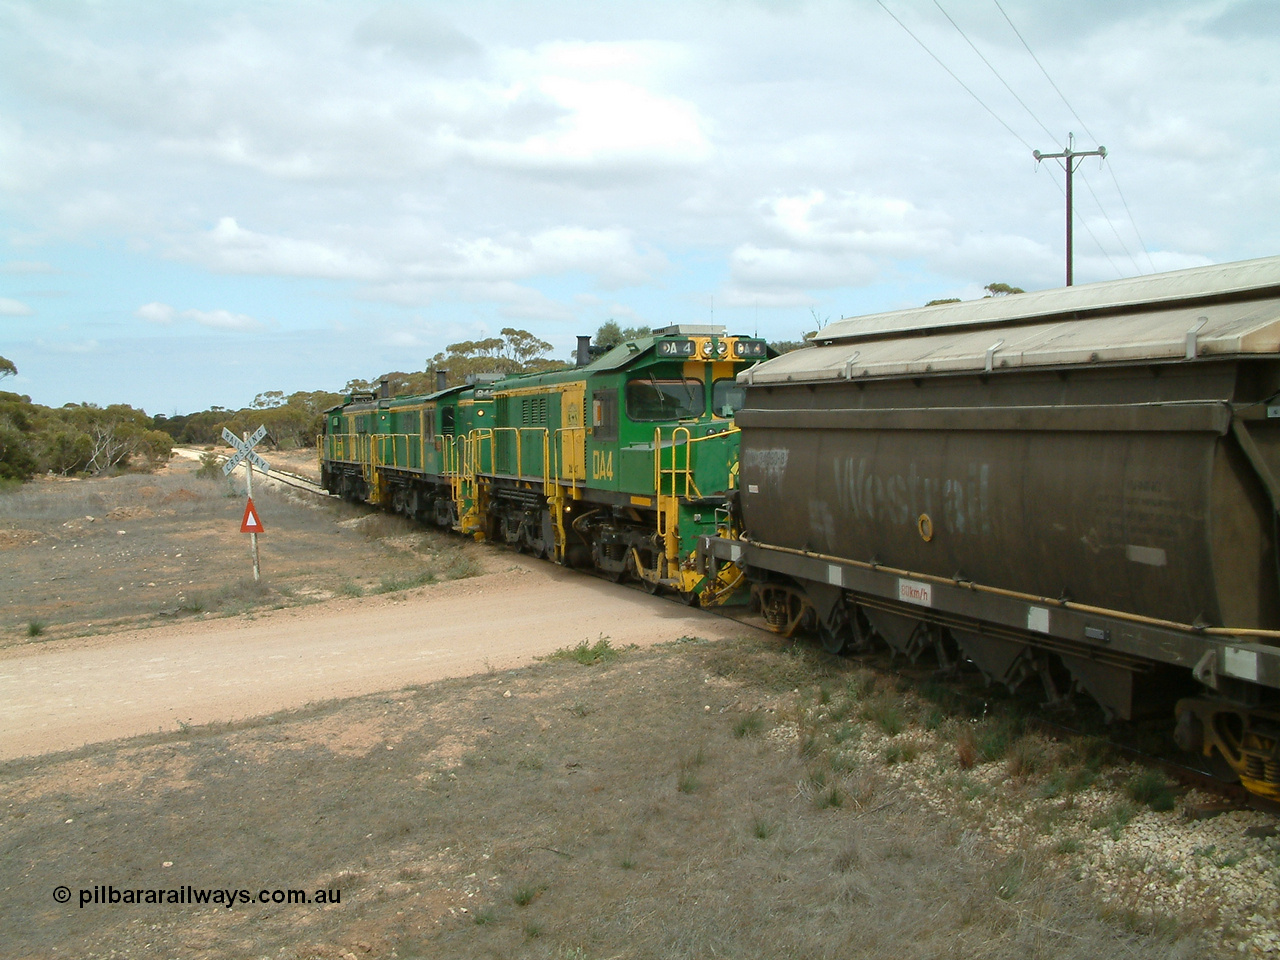 030409 115618
Darke Peake, at the 195 km Dog Fence Road grade crossing loaded grain train with 830 class unit 851 AE Goodwin ALCo model DL531 serial 84137, 851 has spent its entire operating career on the Eyre Peninsula, leads fellow 830 class 842 serial 84140 and a rebuilt unit DA 4, rebuilt from 830 class unit 839 by Port Augusta Workshops, retains original serial 83730 and model DL531 with the first twelve waggons behind the locos XNW type.
Keywords: DA-class;DA4;83730;Port-Augusta-WS;ALCo;DL531G/1;830-class;839;rebuild;